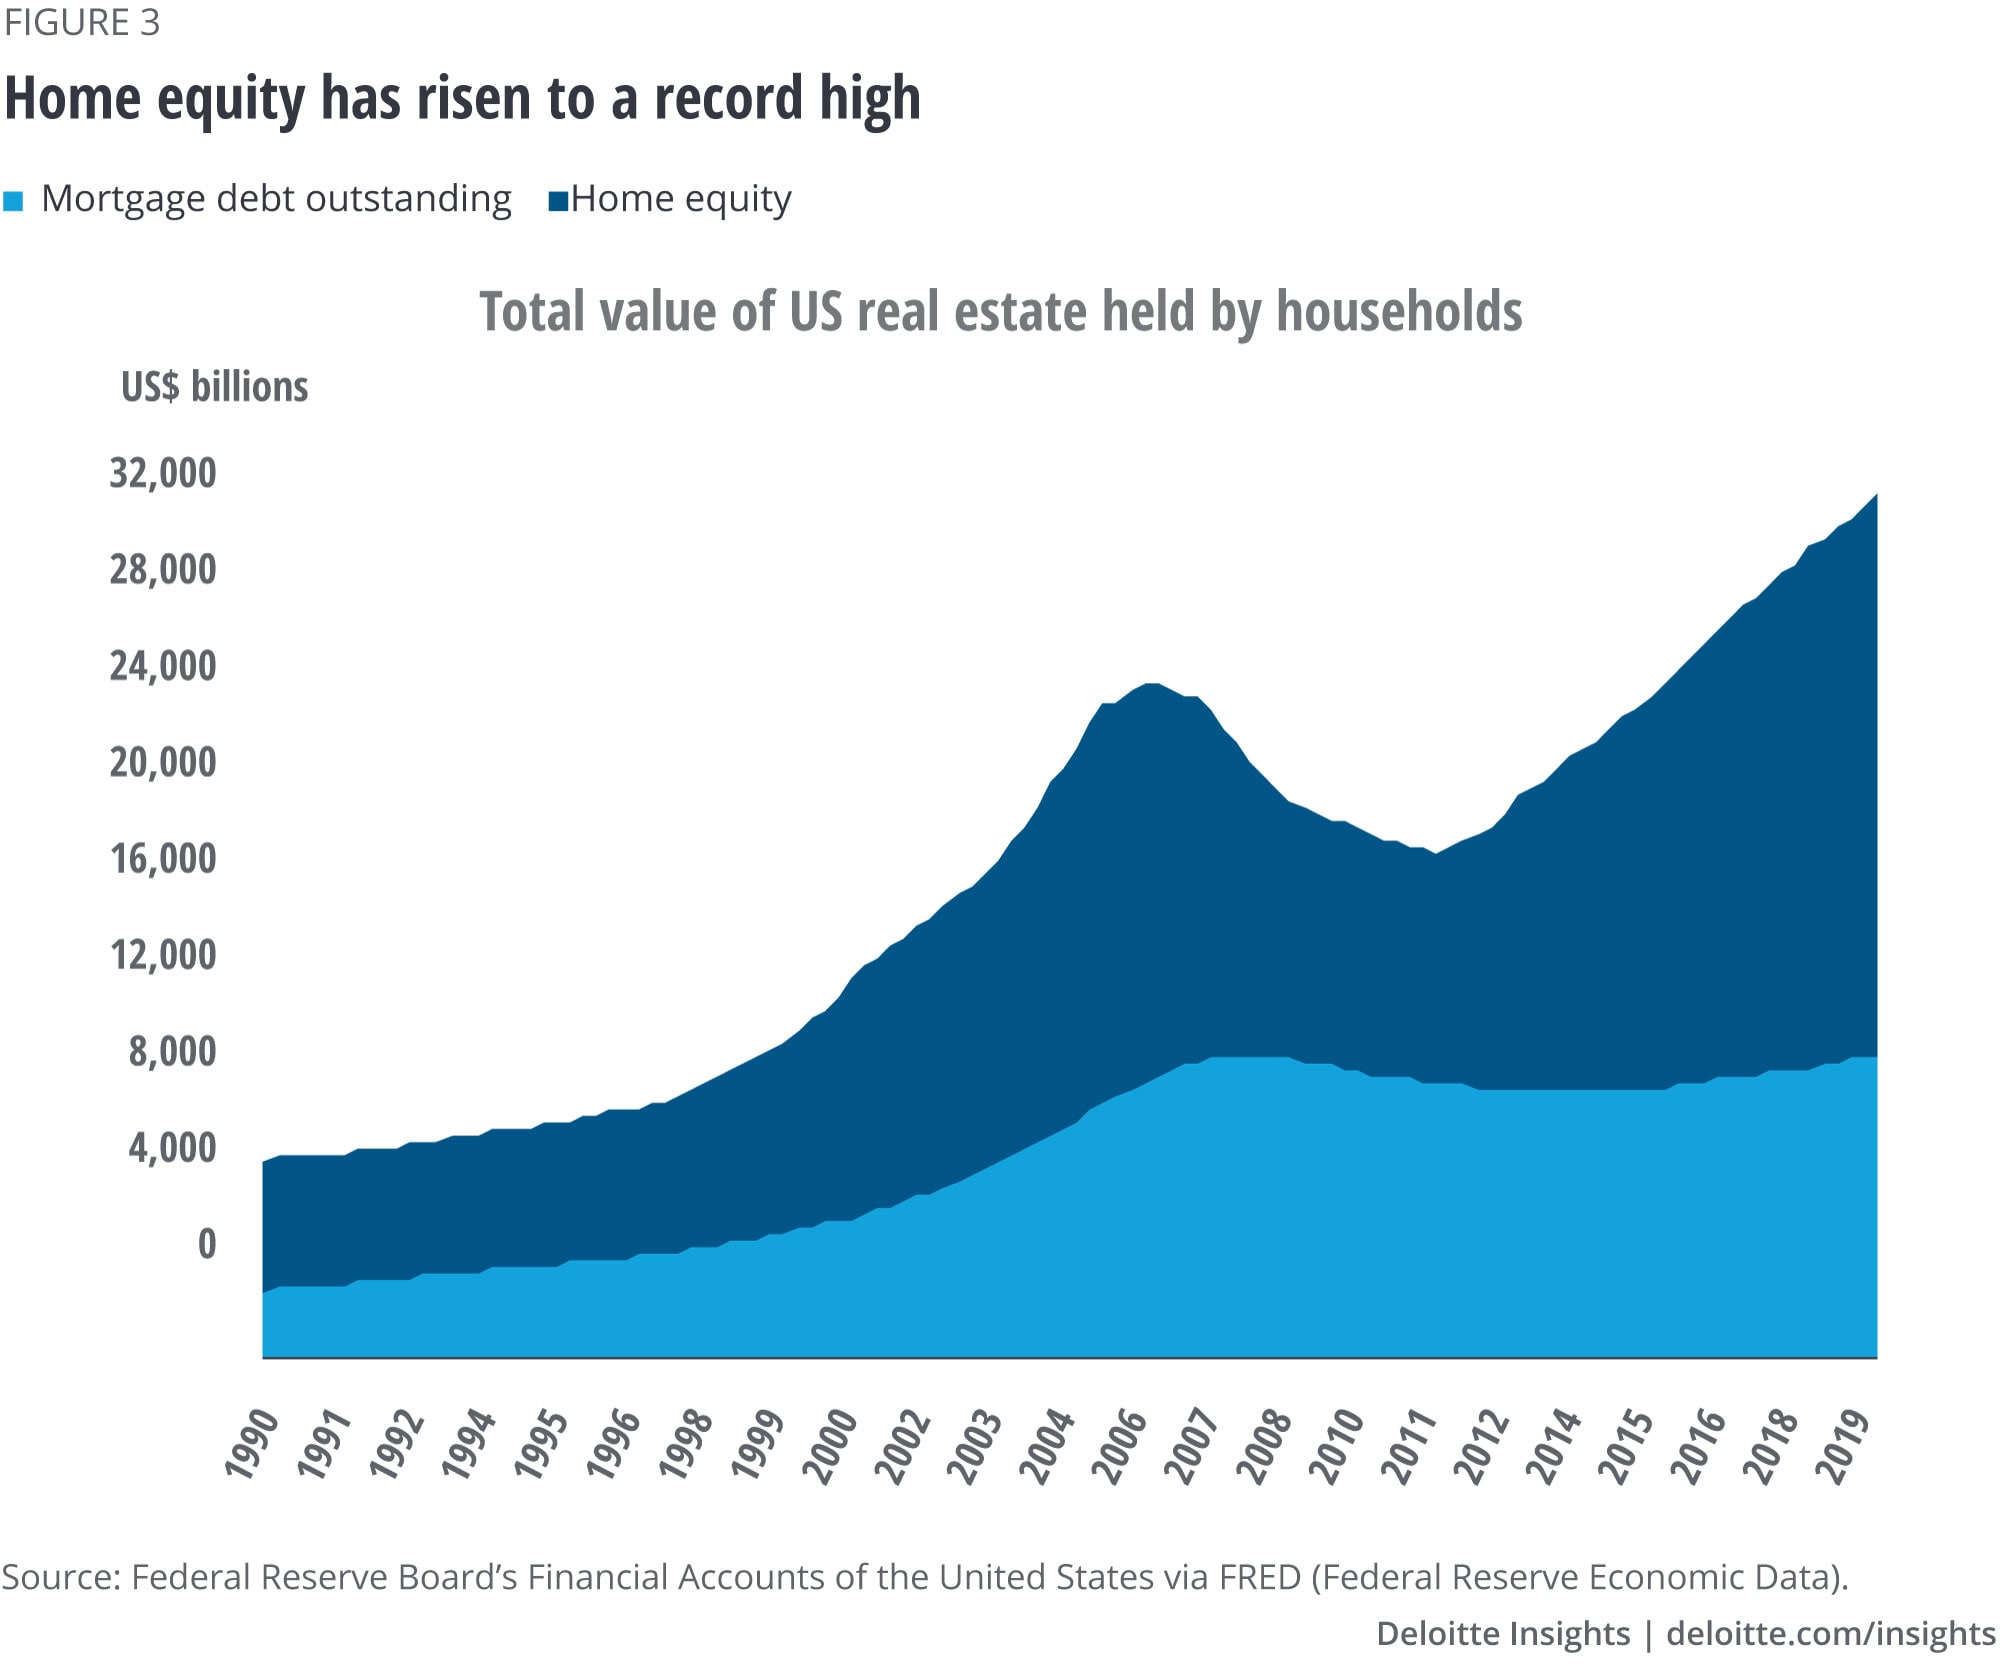 Home equity has risen to a record high